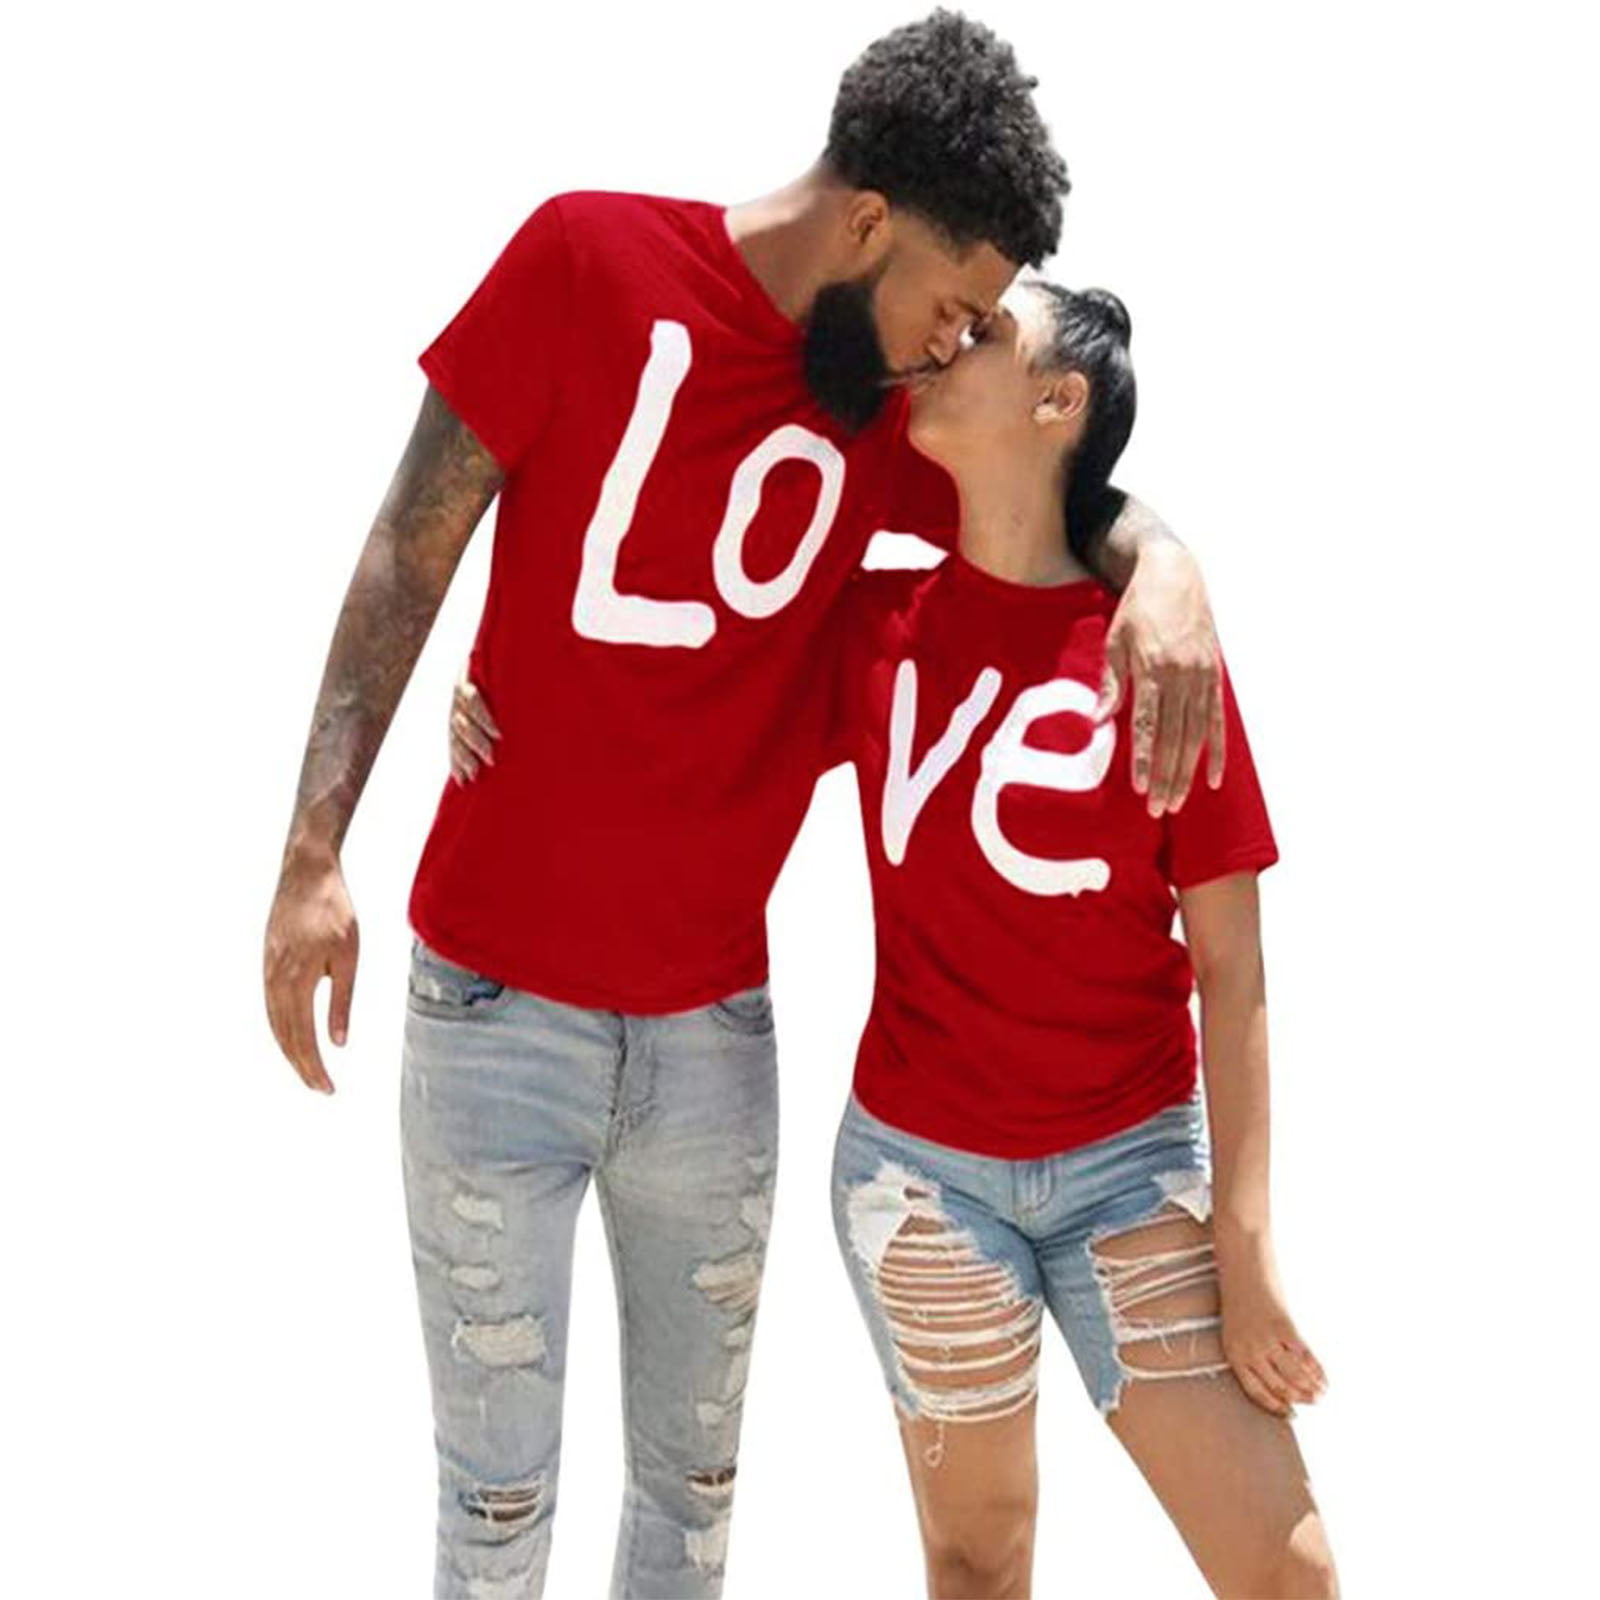 Matching Shirts Cute Valentine Gift Funny Valentines Day Shirt Valentines Day Gift Heartbeat Shirt Valentines Day Shirt Couple Shirt